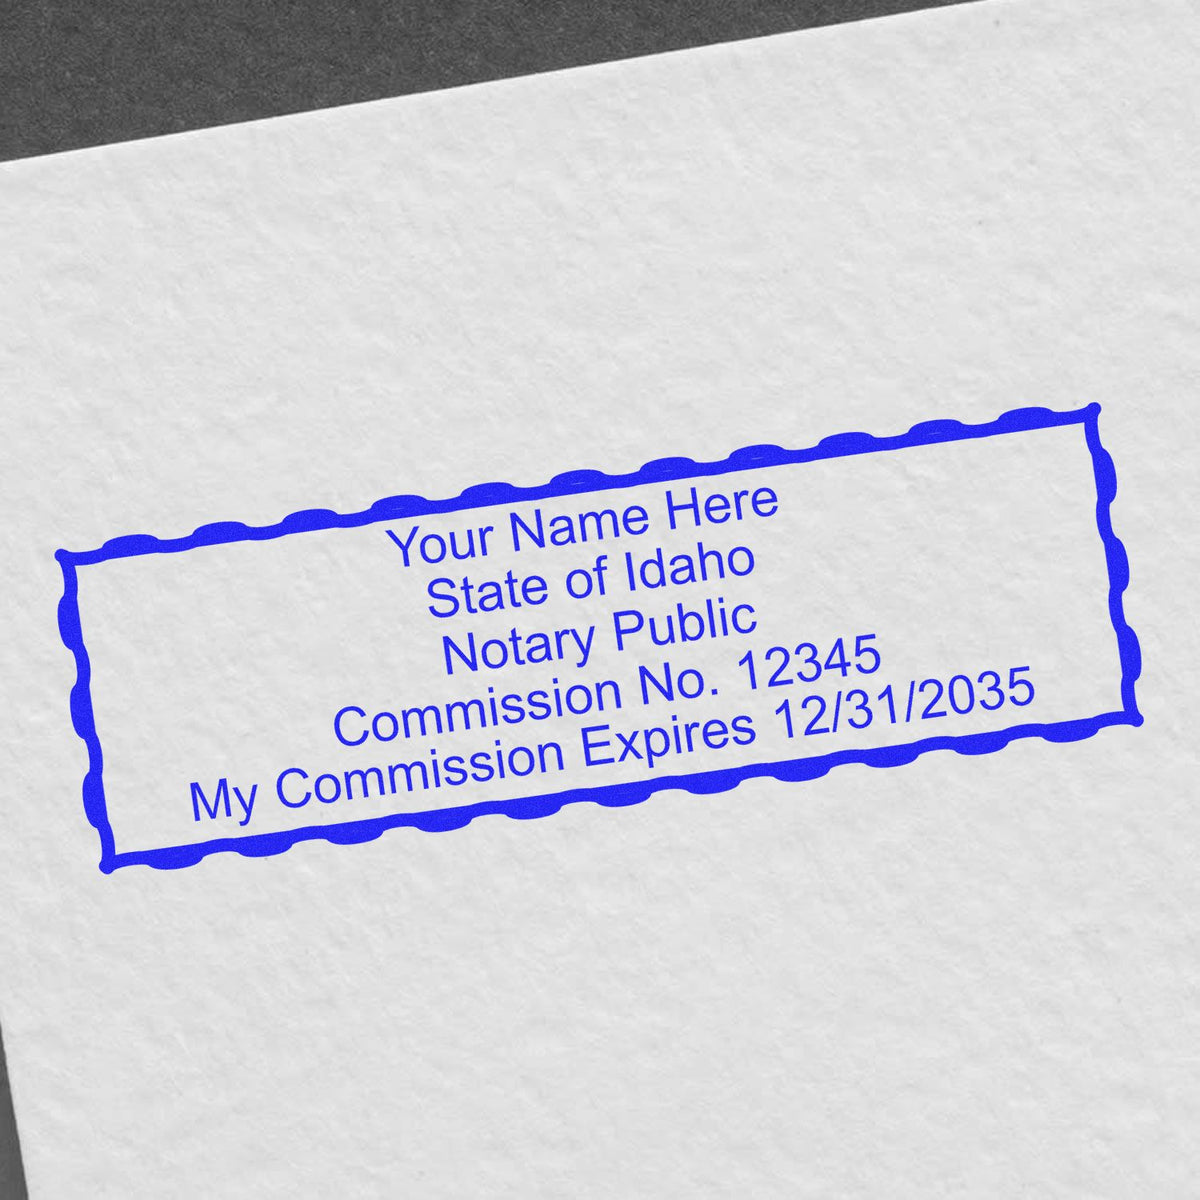 A stamped impression of the MaxLight Premium Pre-Inked Idaho Rectangular Notarial Stamp in this stylish lifestyle photo, setting the tone for a unique and personalized product.